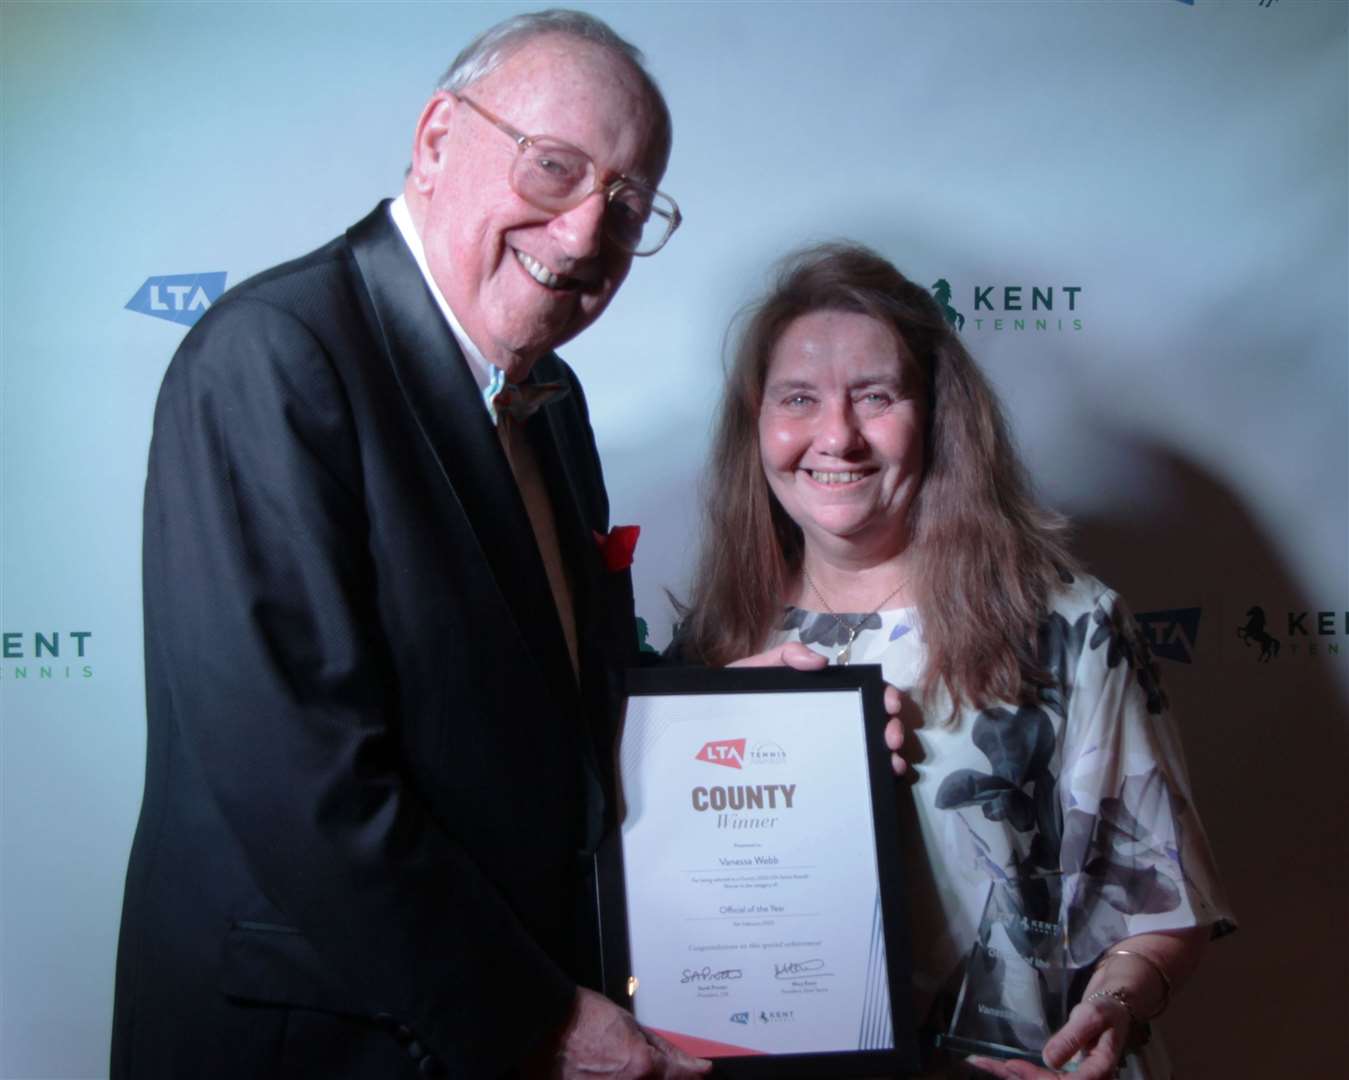 Vanessa Webb, pictured with after-dinner speaker Bob Bevan MBE, was named Kent LTA Official of the Year in February